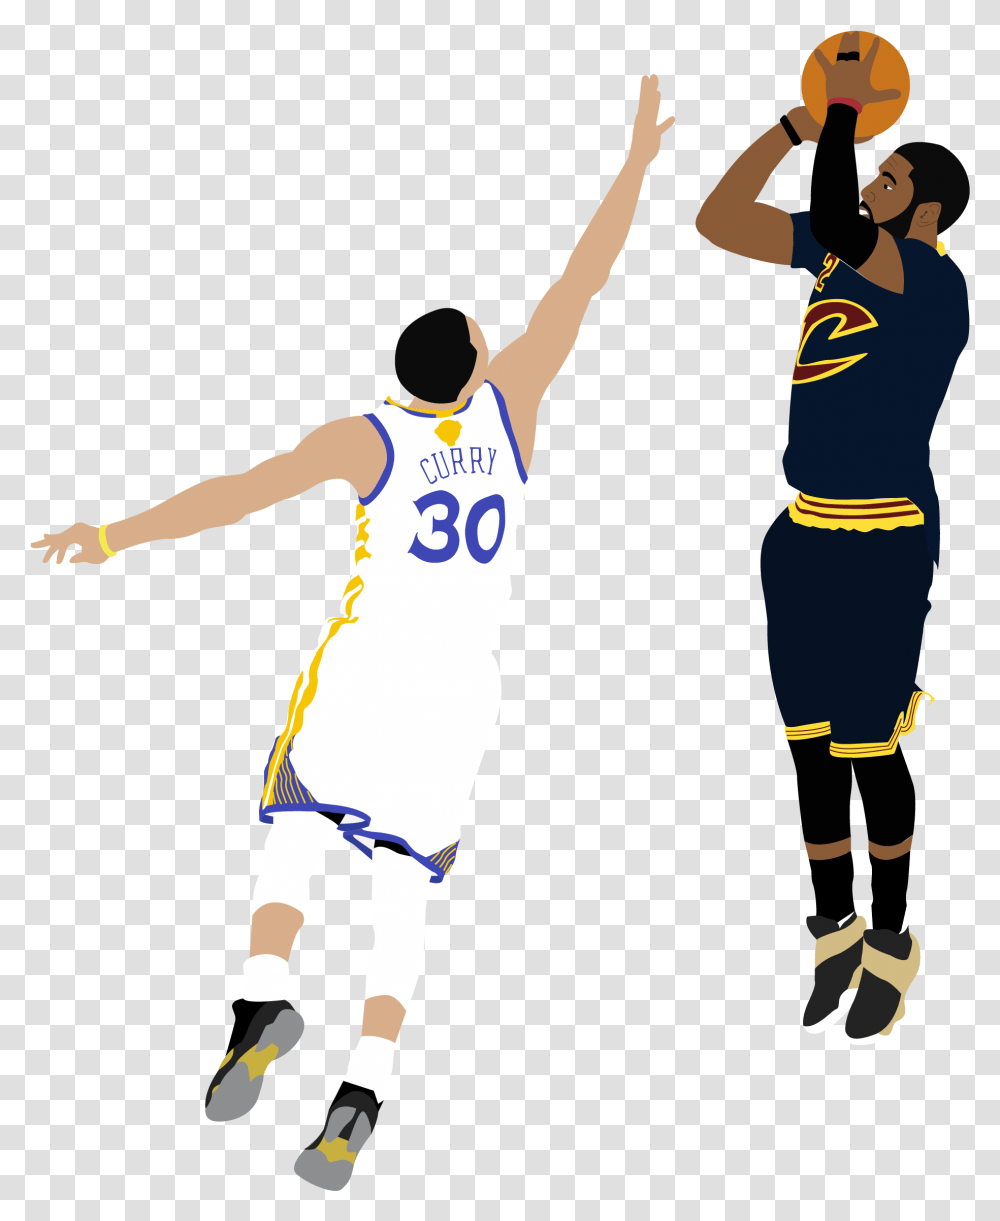 Kyrie Irving Shooting Over Steph Curry Cartoon Basketball Player Shooting, Person, Human, People, Clothing Transparent Png